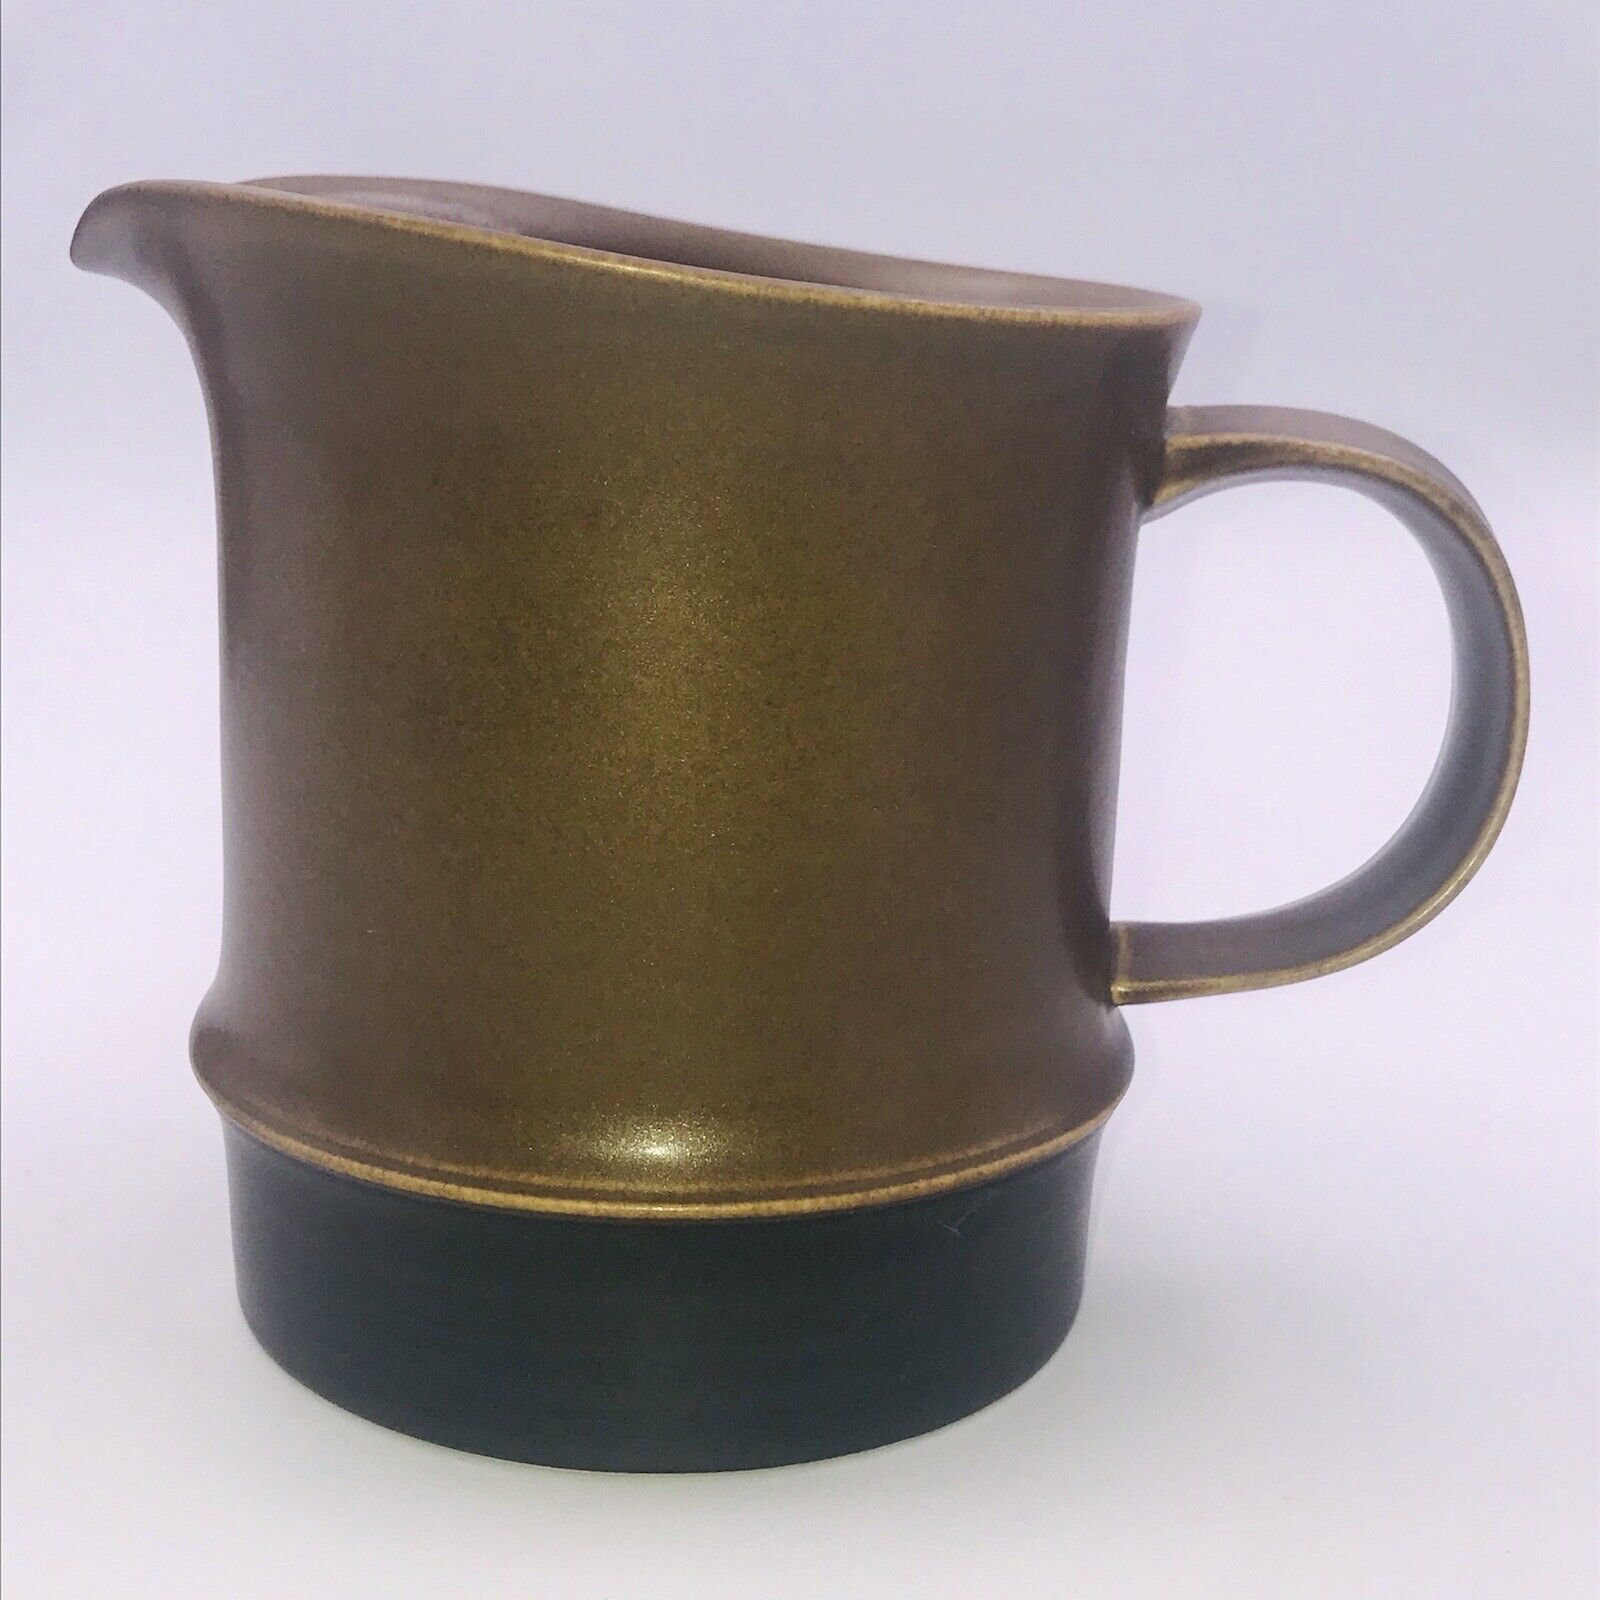 Primary image for 1970 Vintage Goebel Schwarzwald Brown Water Pitcher W Germany 6” Tall 5.25” Dia